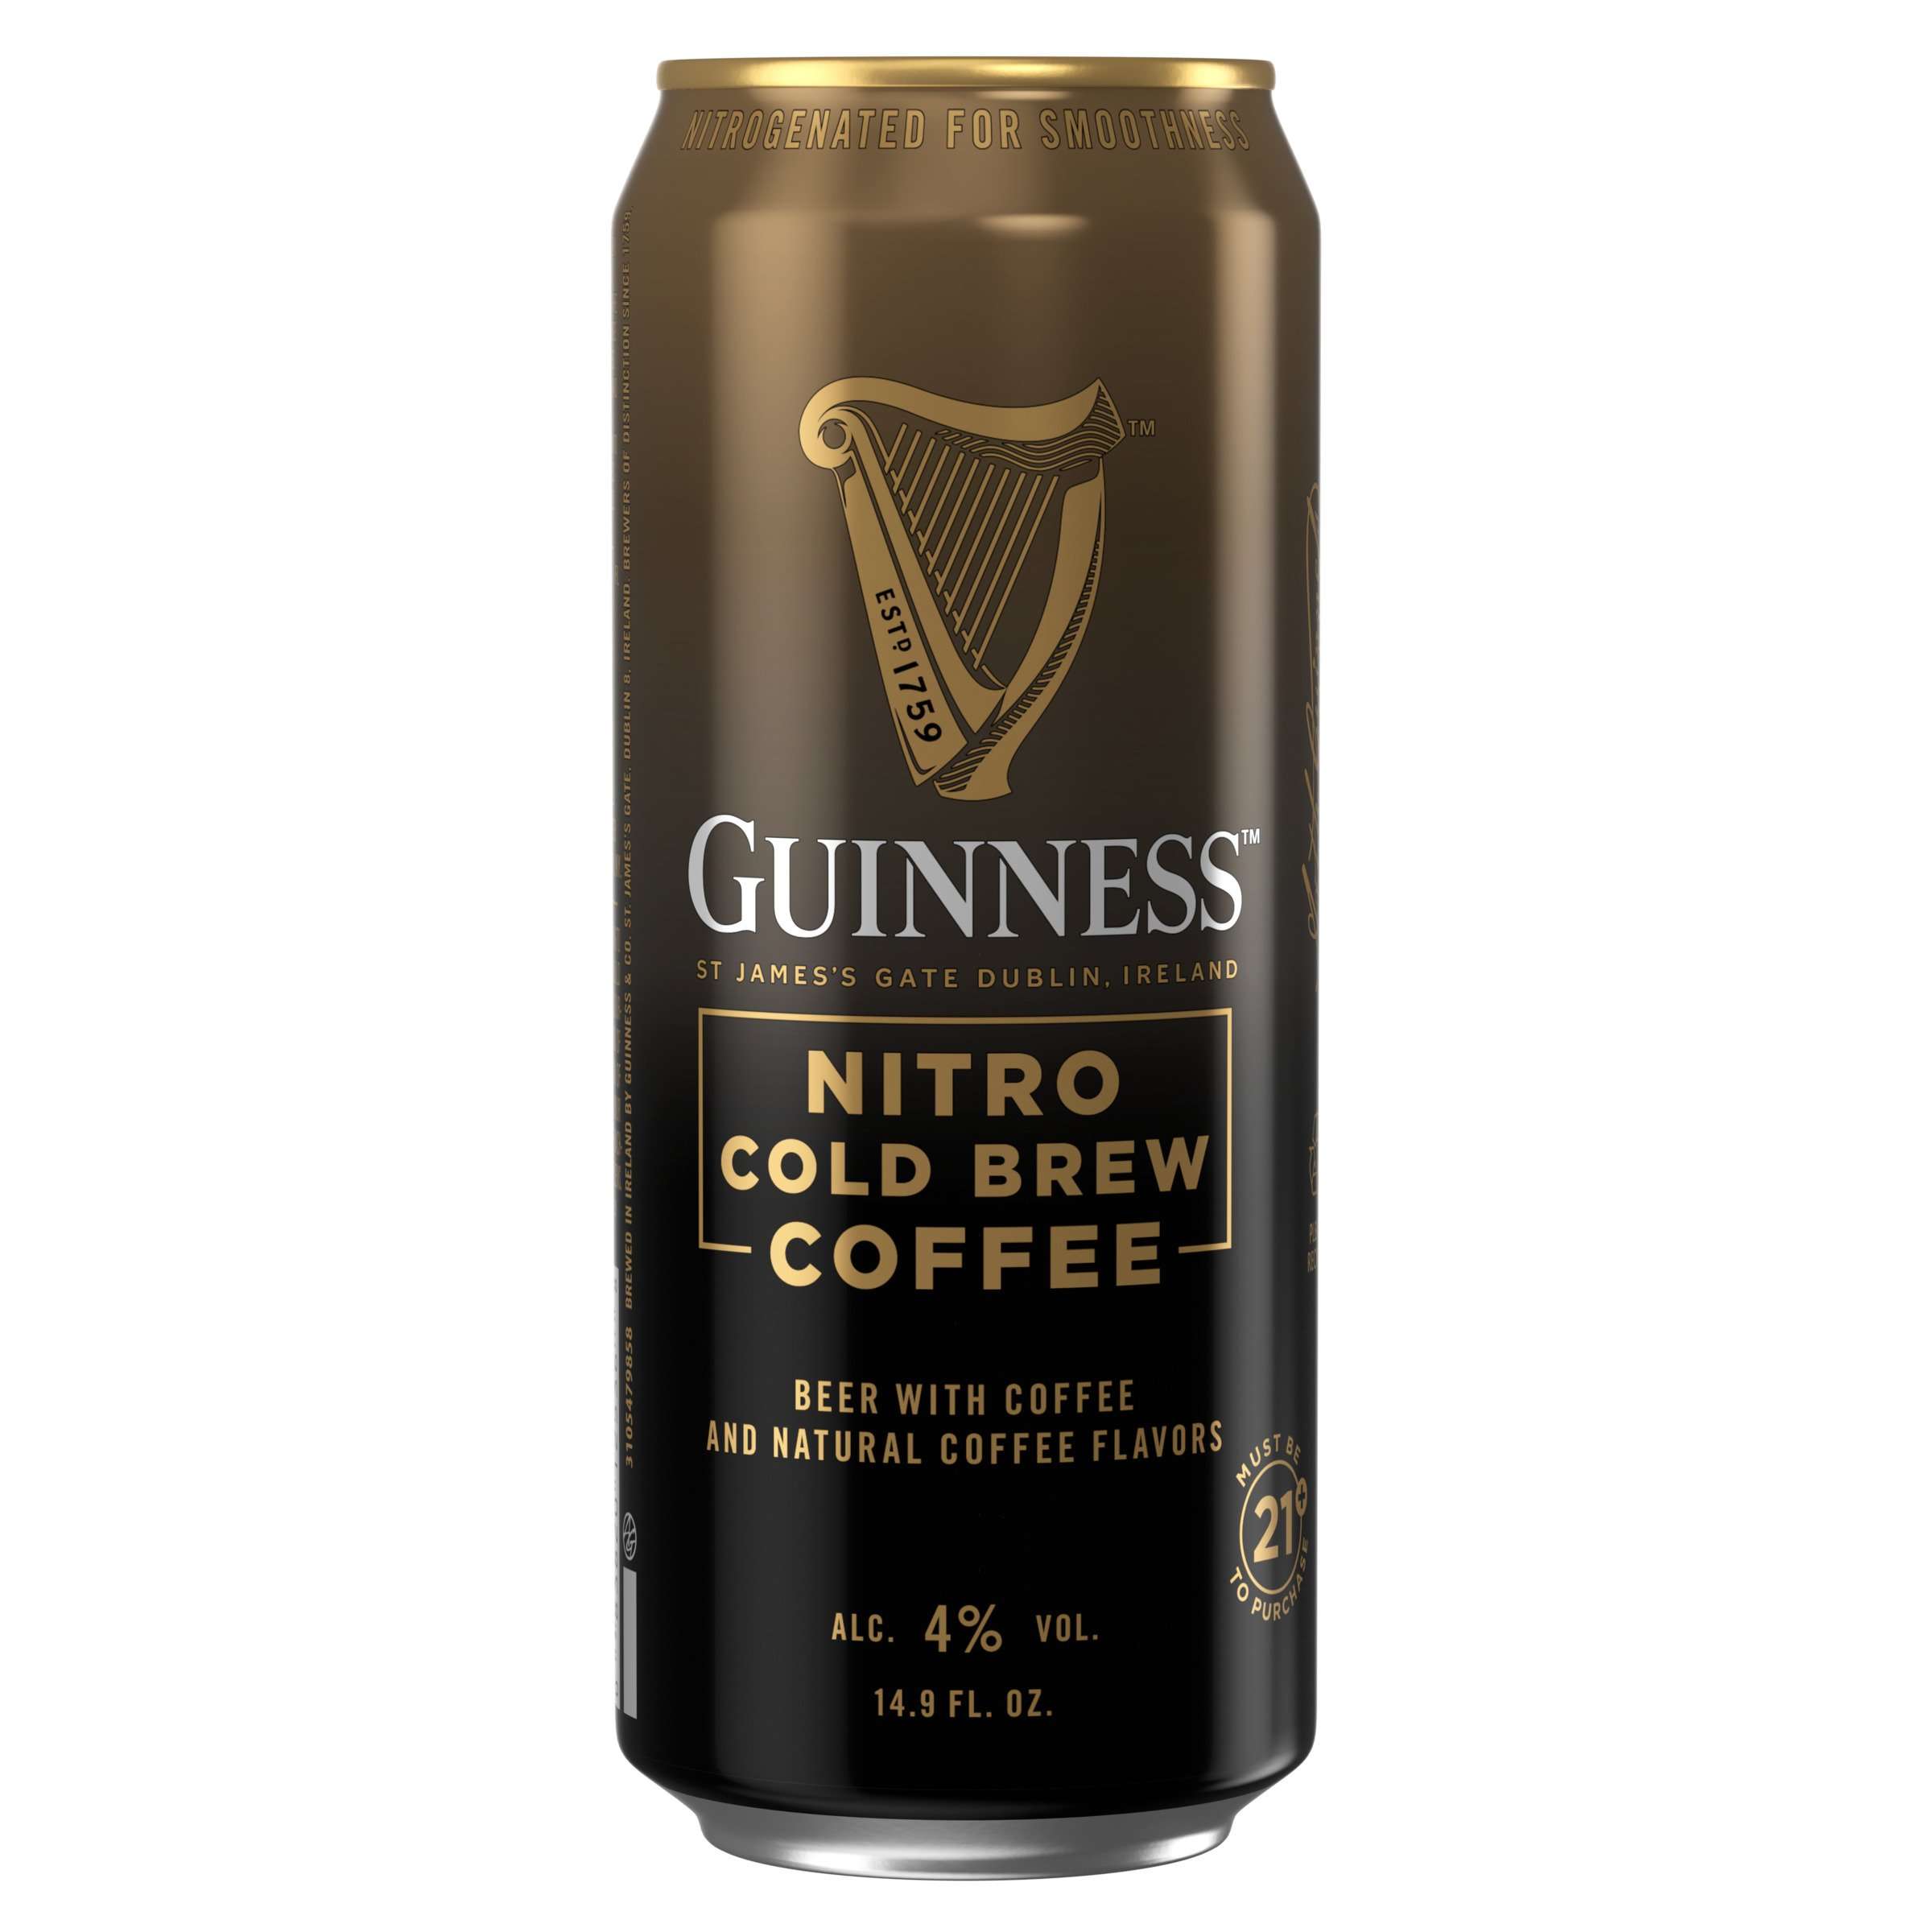 Buy Guinness Nitro Cold Brew Coffee Online